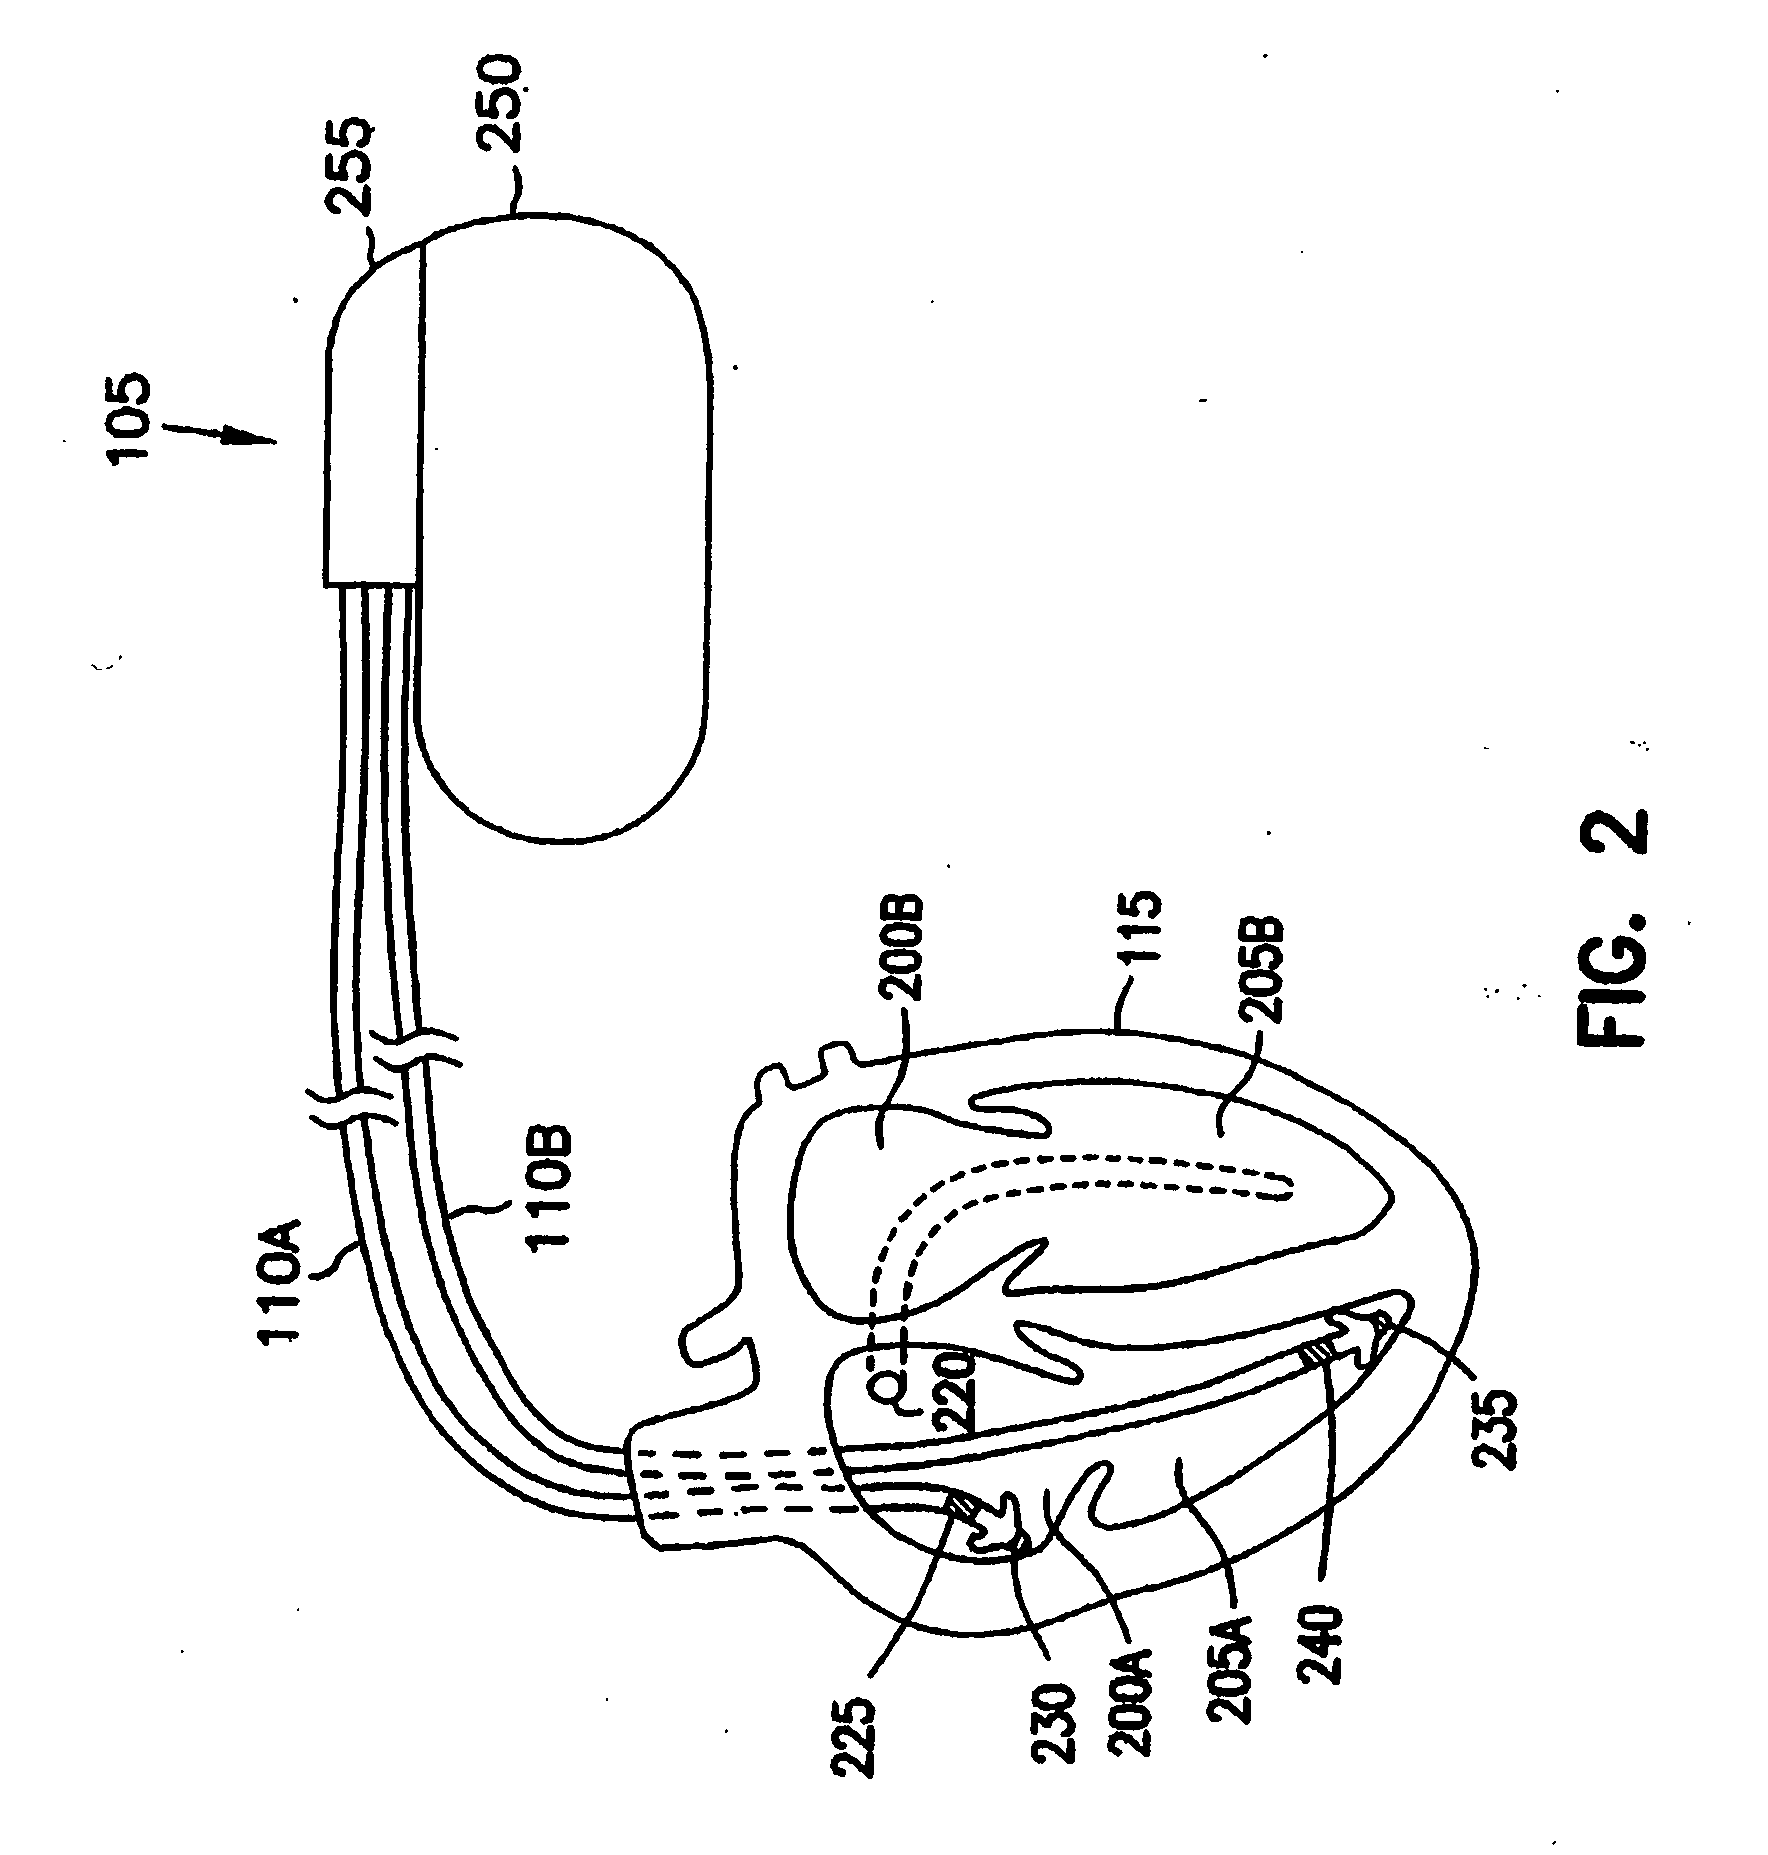 System and method for recovery from memory errors in a medical device